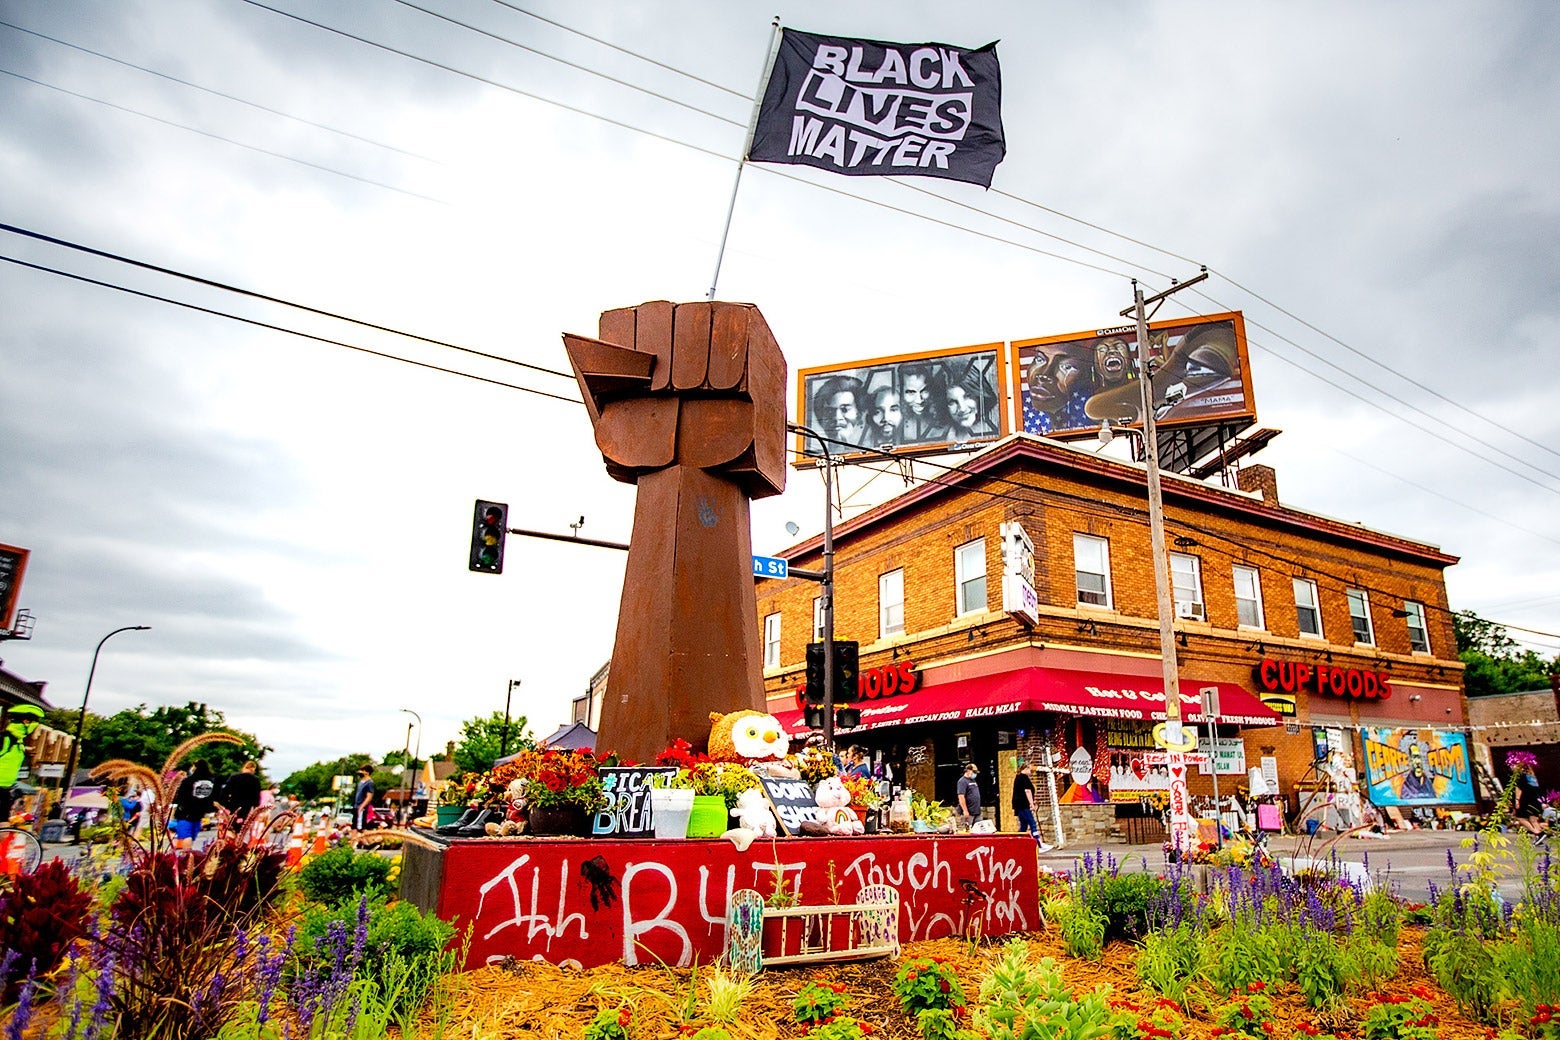 A wooden raised fist statue stands  in the middle of an intersection that has become a memorial.